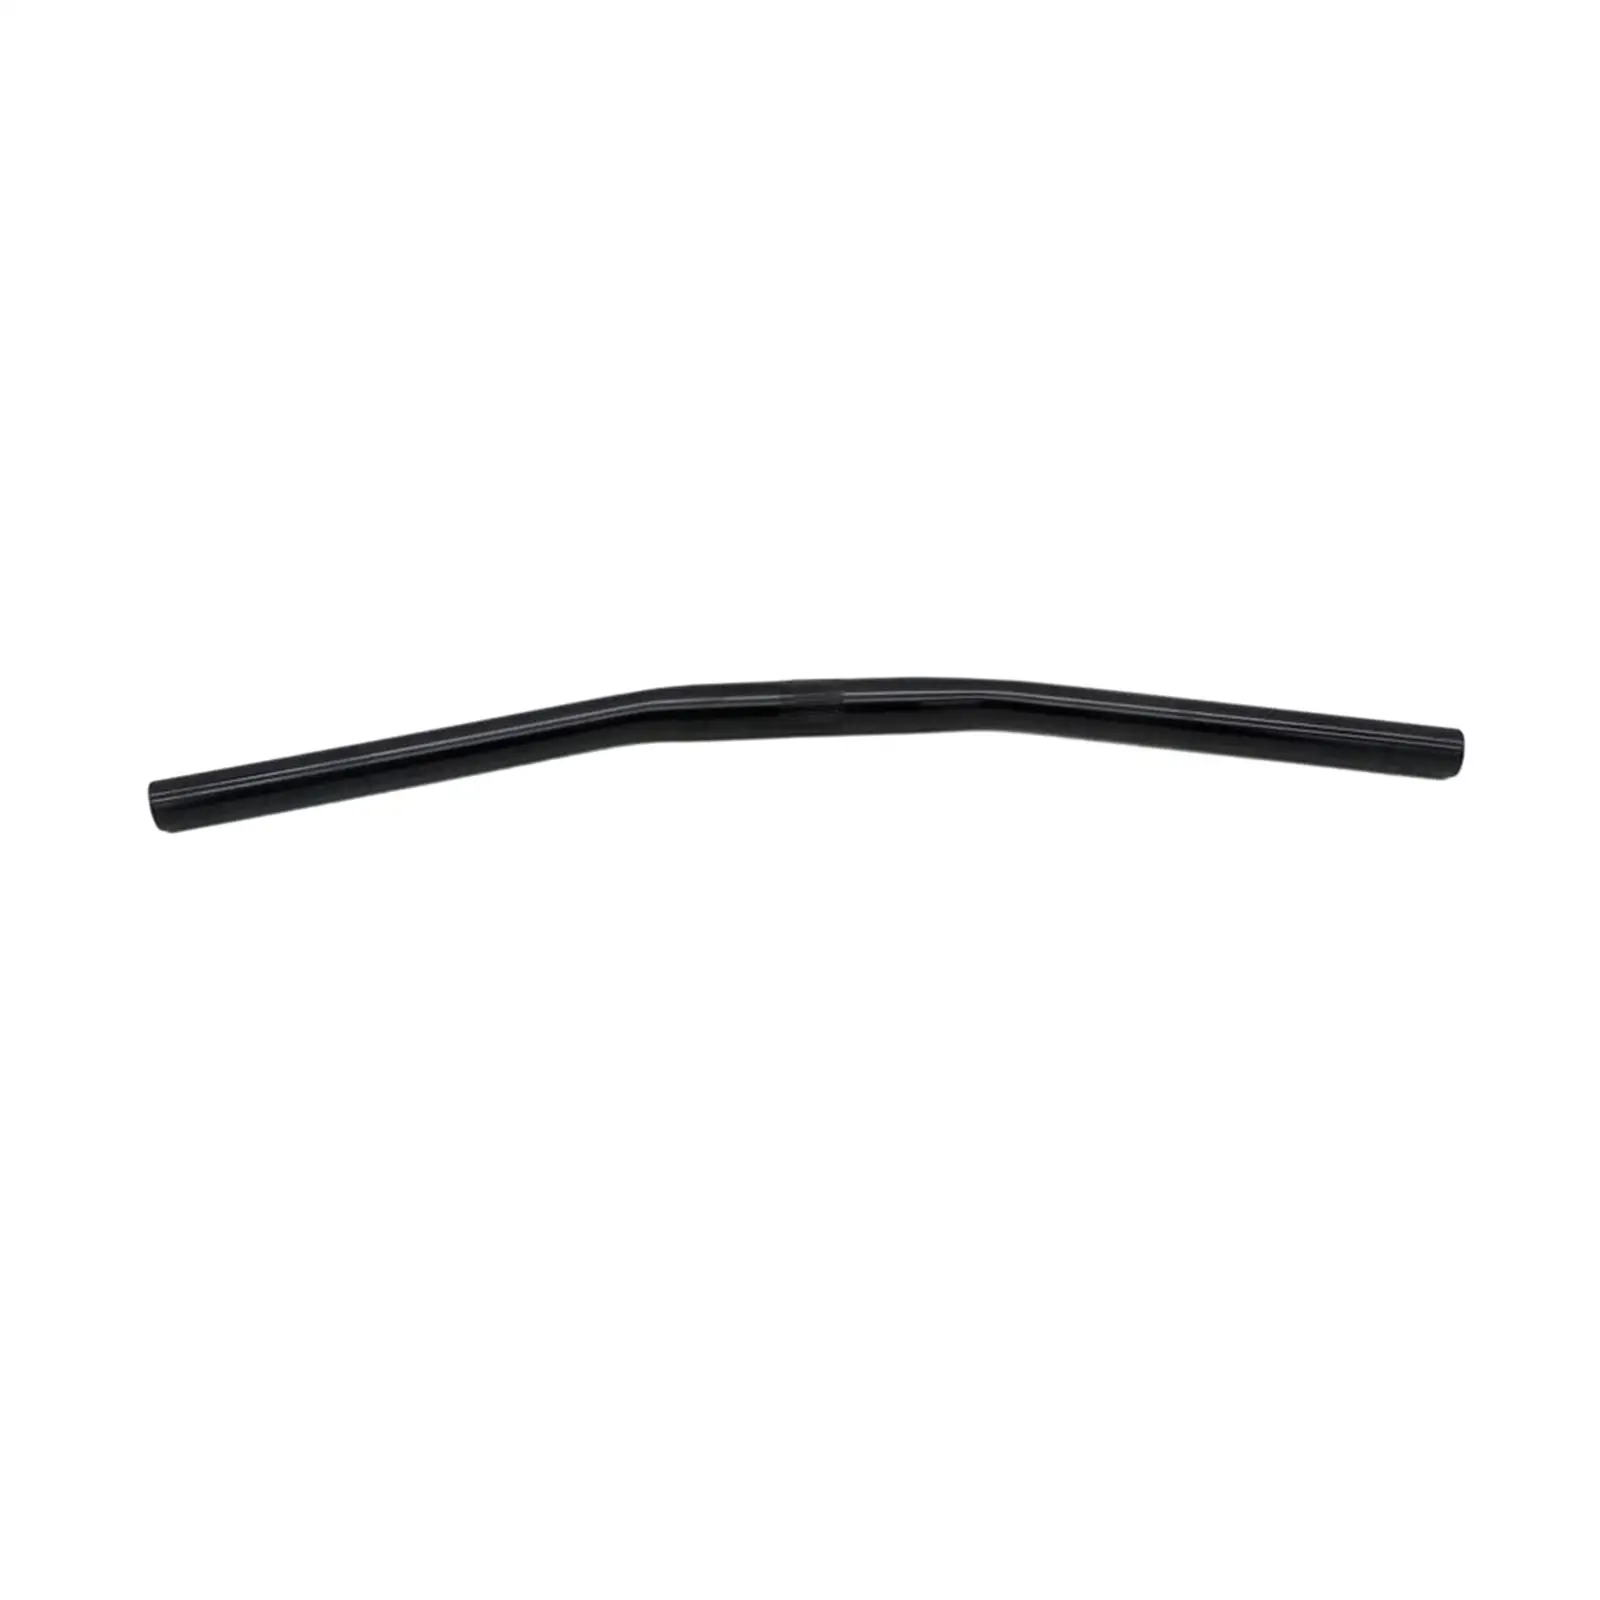 Mountain Bike Handlebar Black Bicycle Riser Bar for Accessories Parts Riding